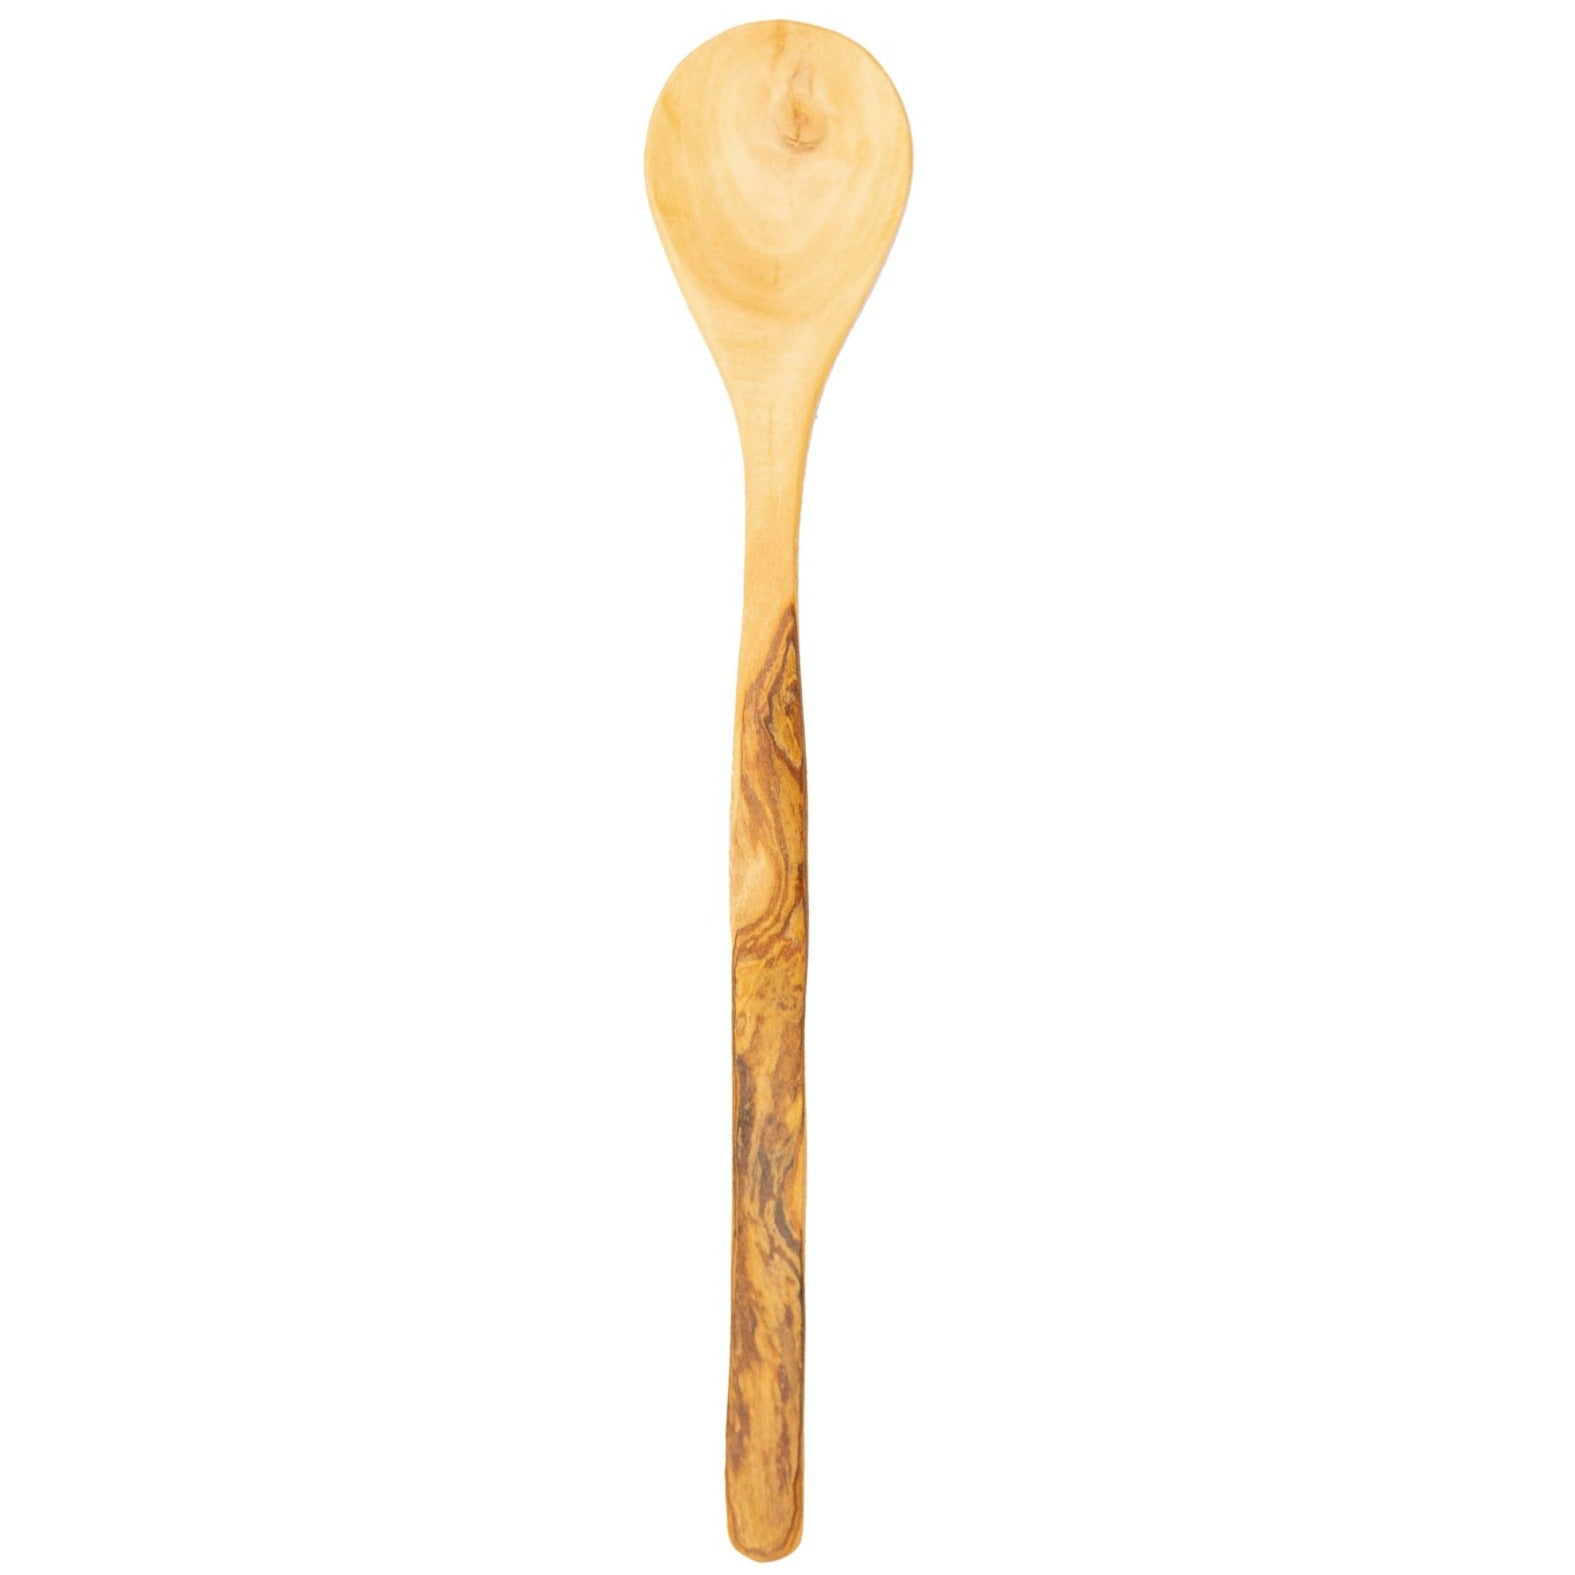 Hand-carved wood stirring spoon: sustainable macawood, laurelwood, or coffeewood. Fair trade, artisan-crafted, unique gift. Elevate your drinks & home! ✨